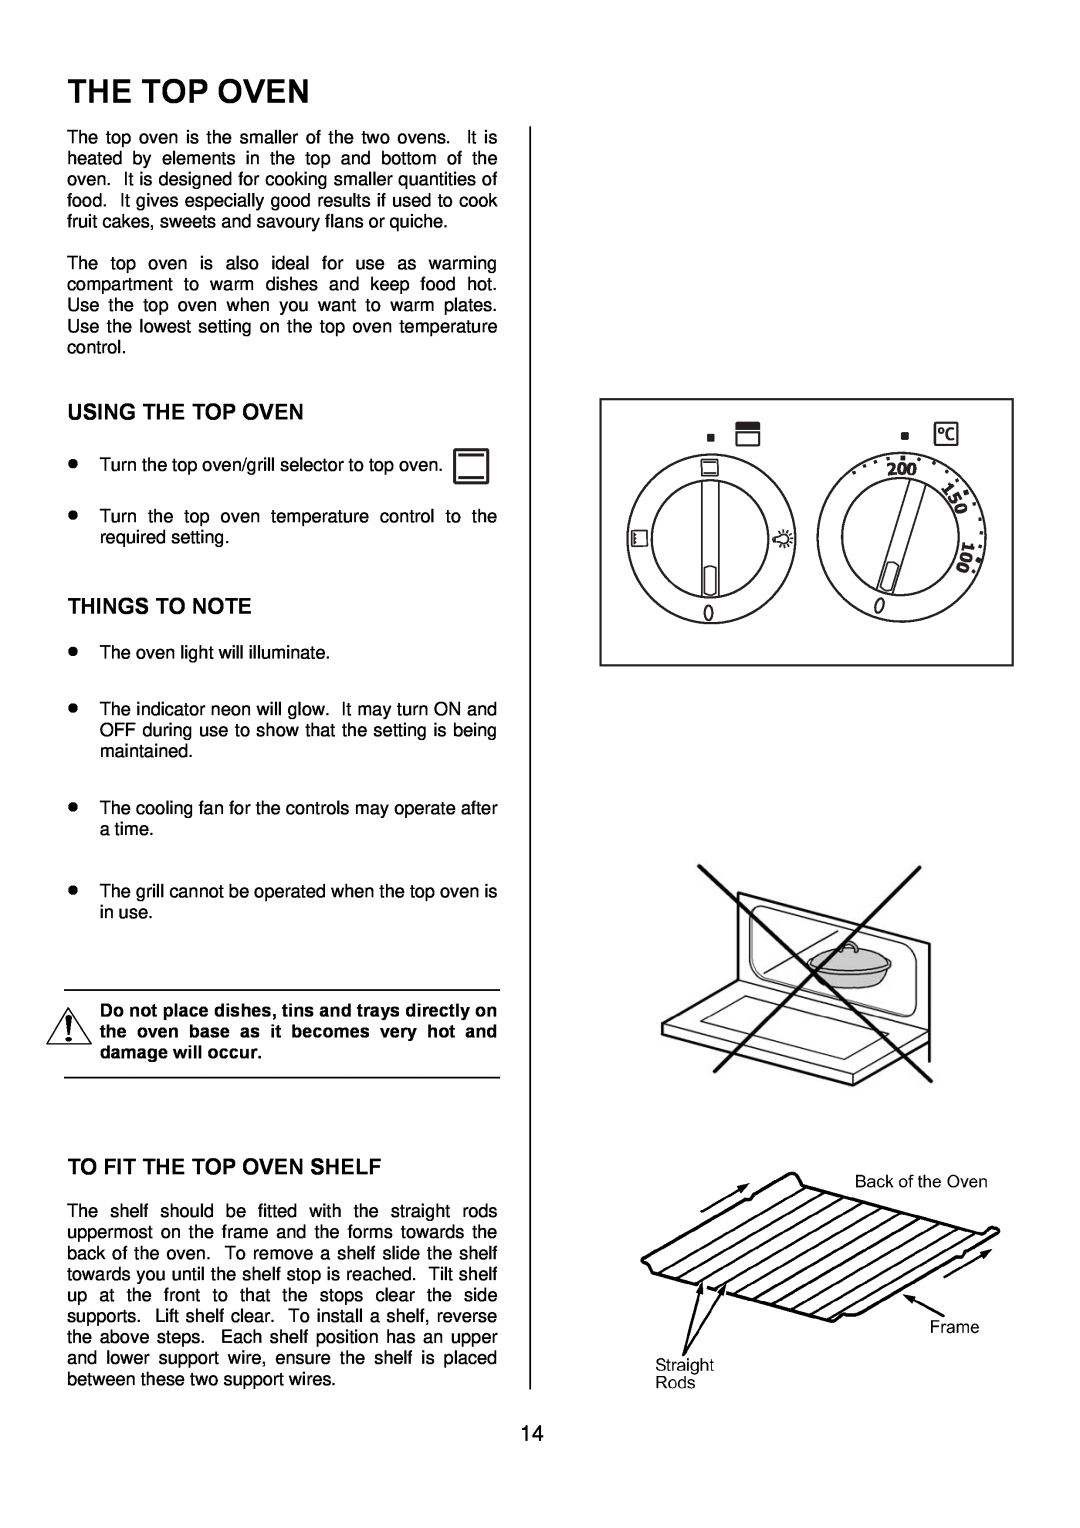 Electrolux EKC6045, EKC6044 manual Using The Top Oven, To Fit The Top Oven Shelf, Things To Note 